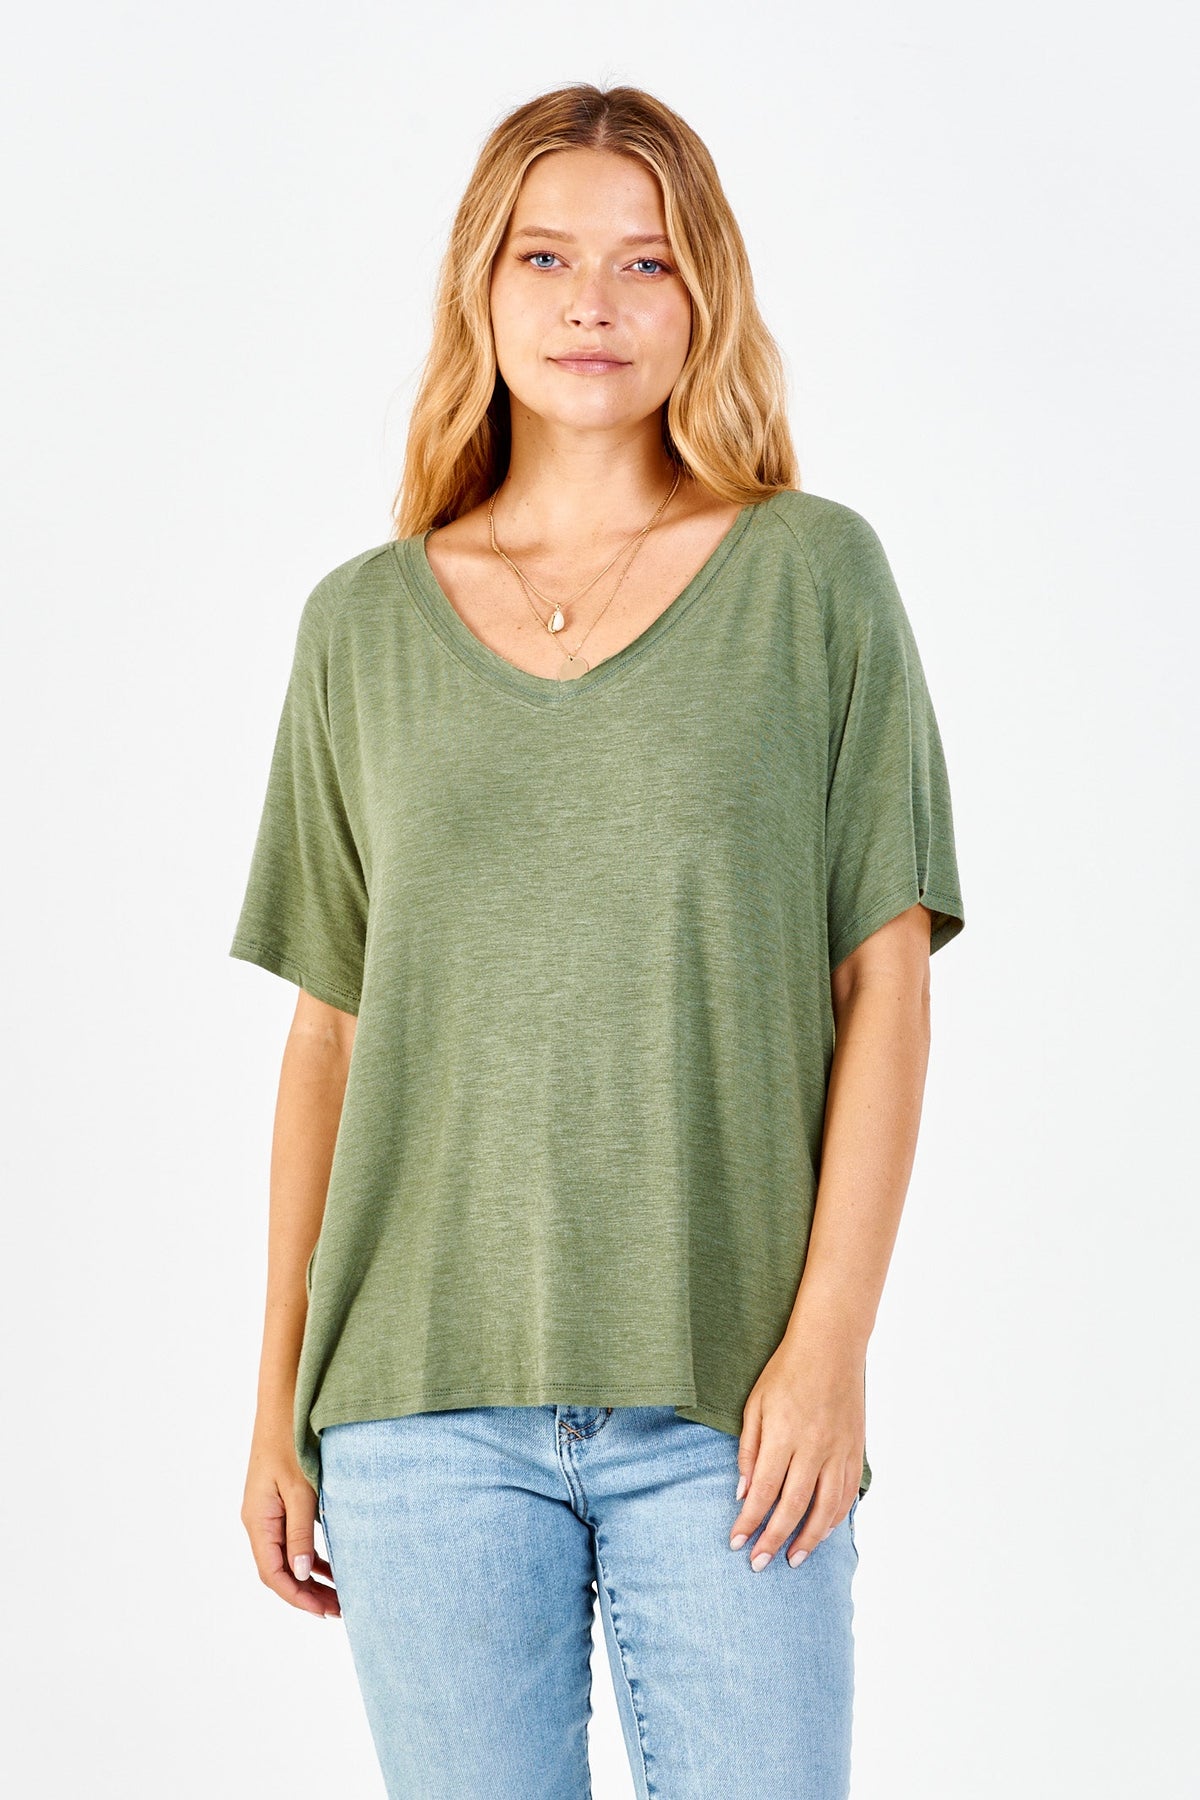 taylor-raglan-sleeve-top-olive-oil-front-image-another-love-clothing